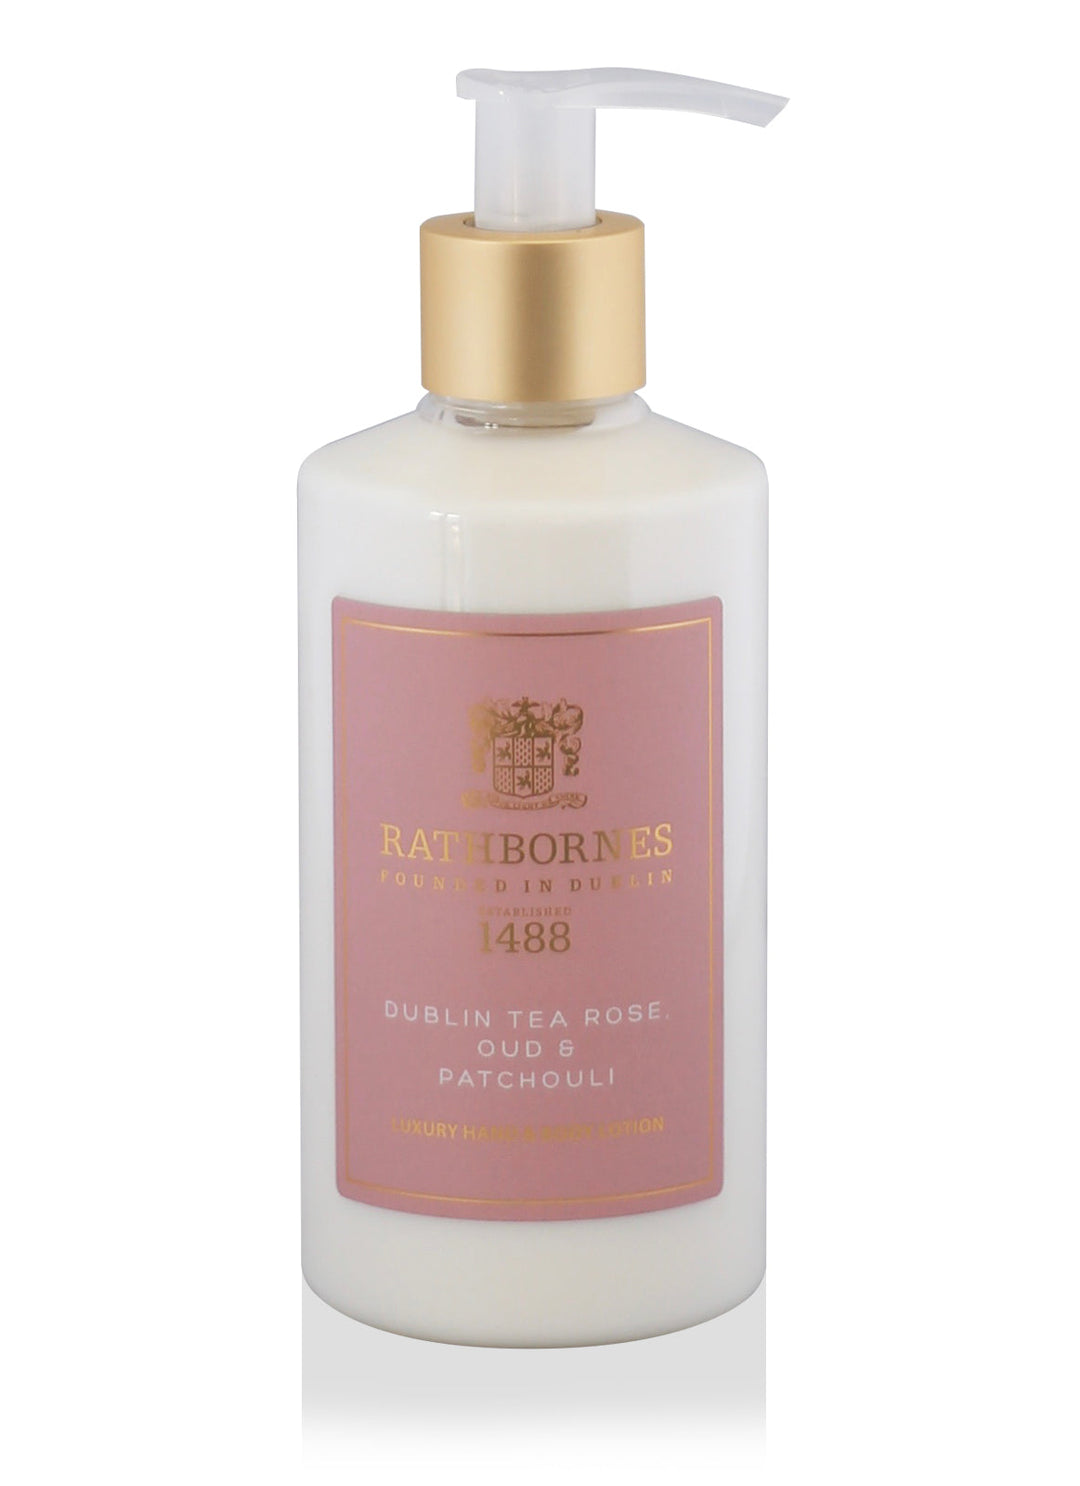 Dublin Tea Rose, Oud & Patchouli Luxury Hand and Body Lotion